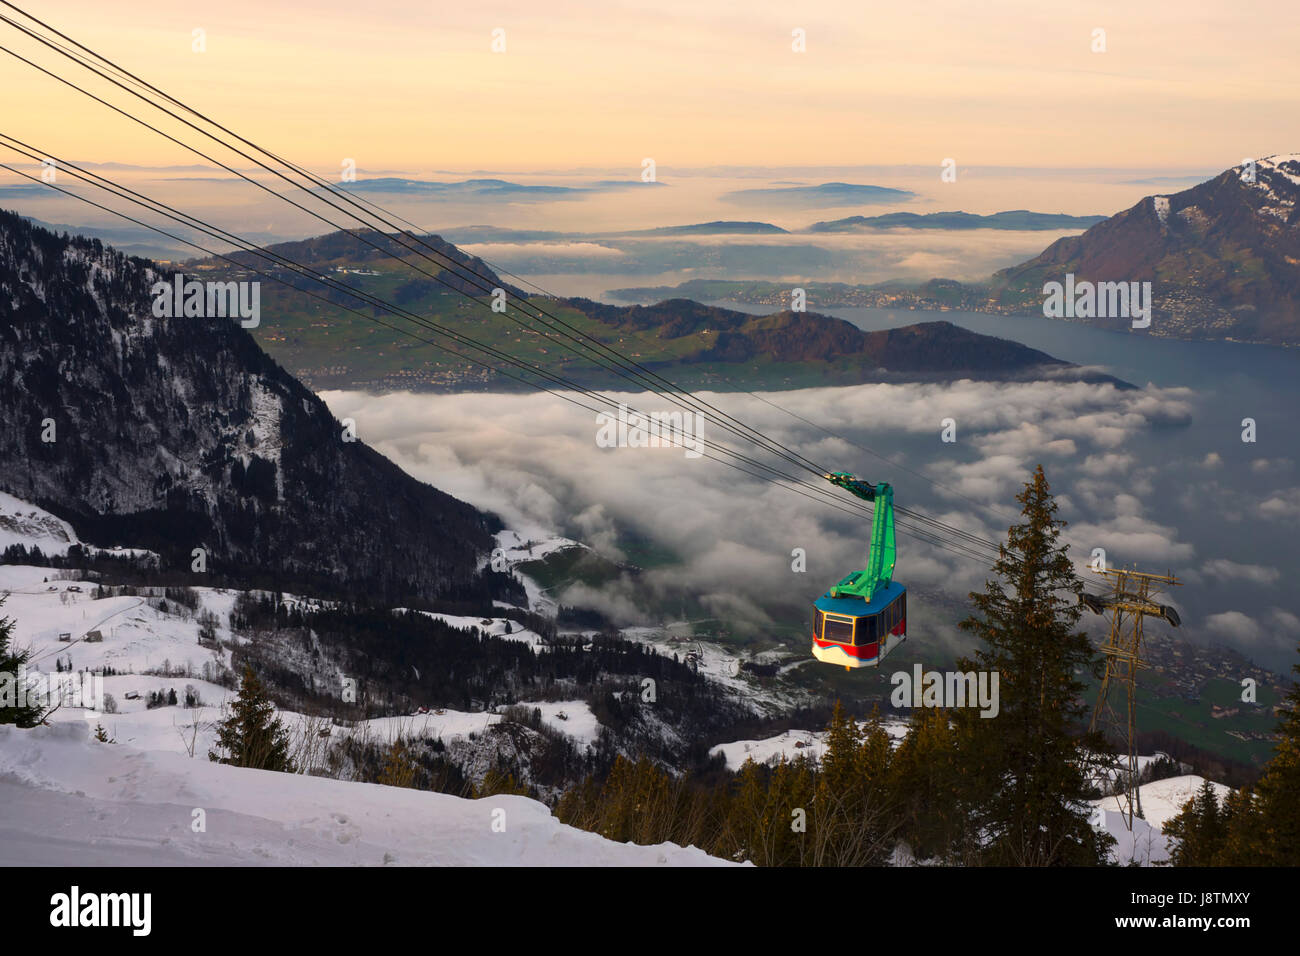 Klewenalp High Resolution Stock Photography and Images - Alamy